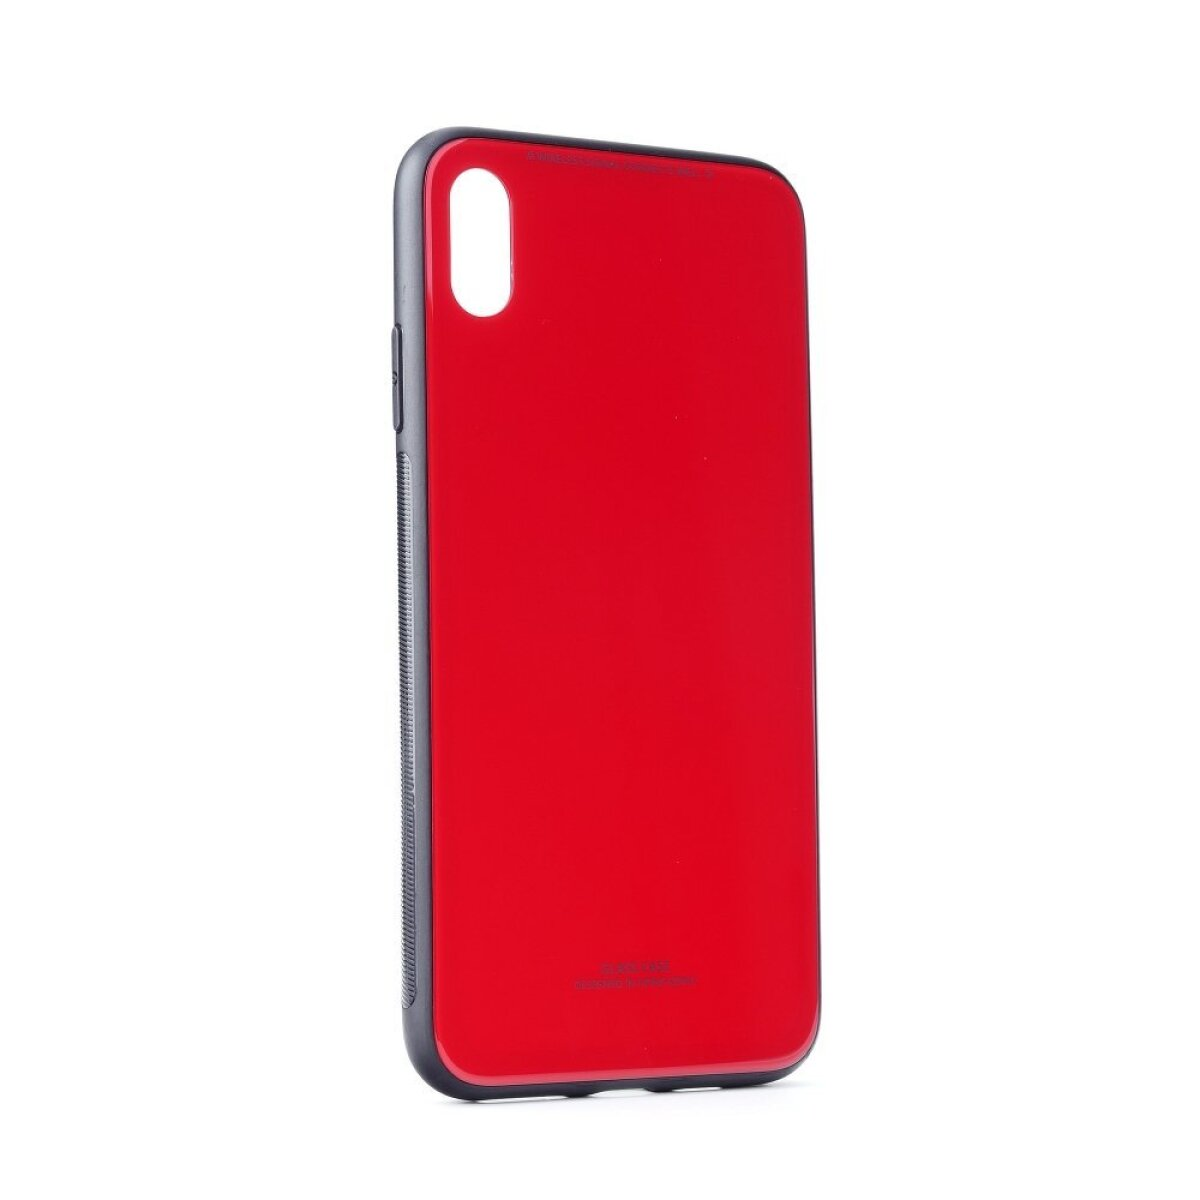 FORCELL GLASS CASE iPhone Max, 11 Rot iPhone 11 Bookcover, schwarz/rot, Apple, Schwarz; Pro Max Pro